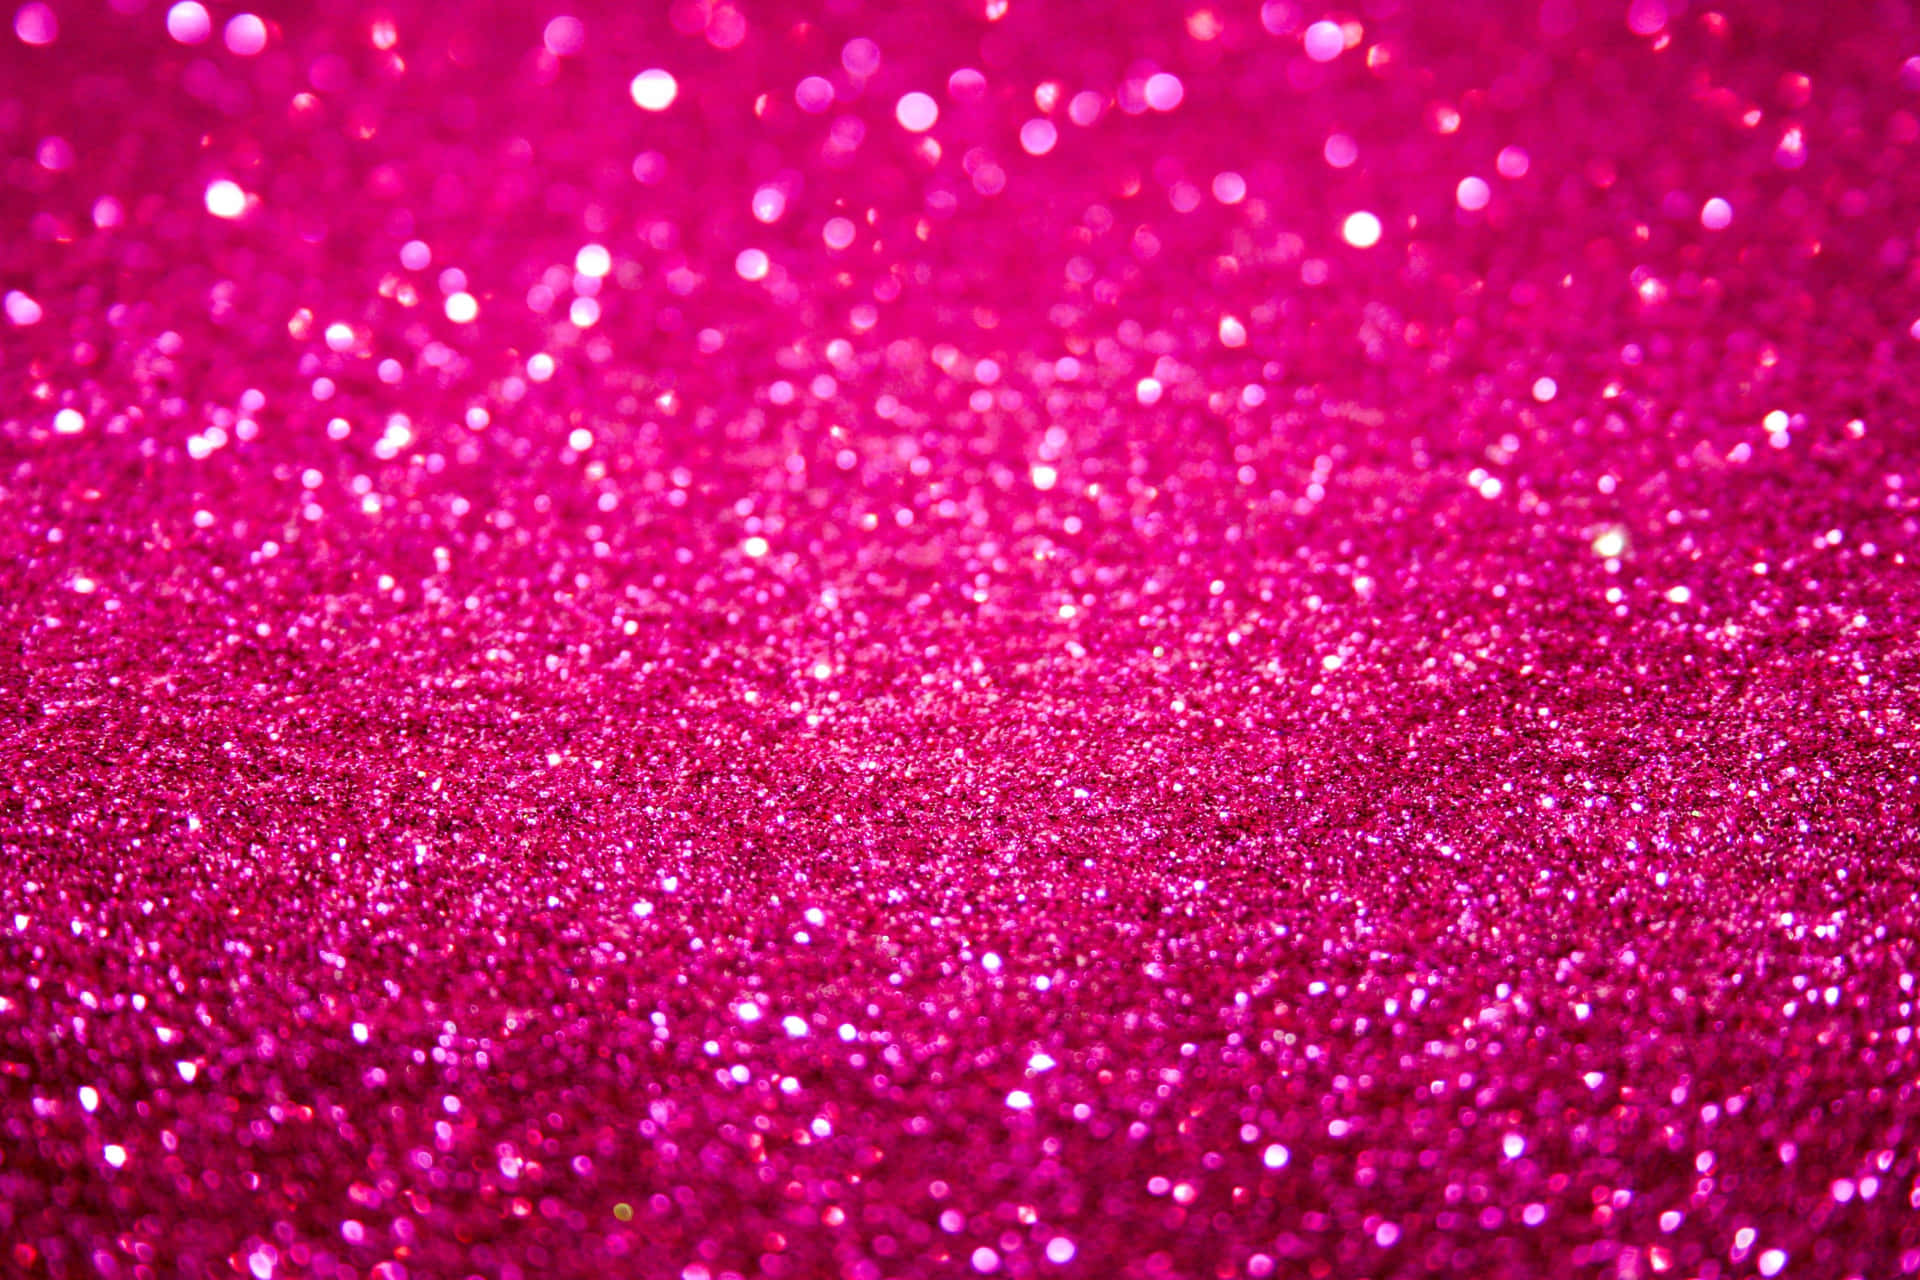 Magical pink sparkles of glitter